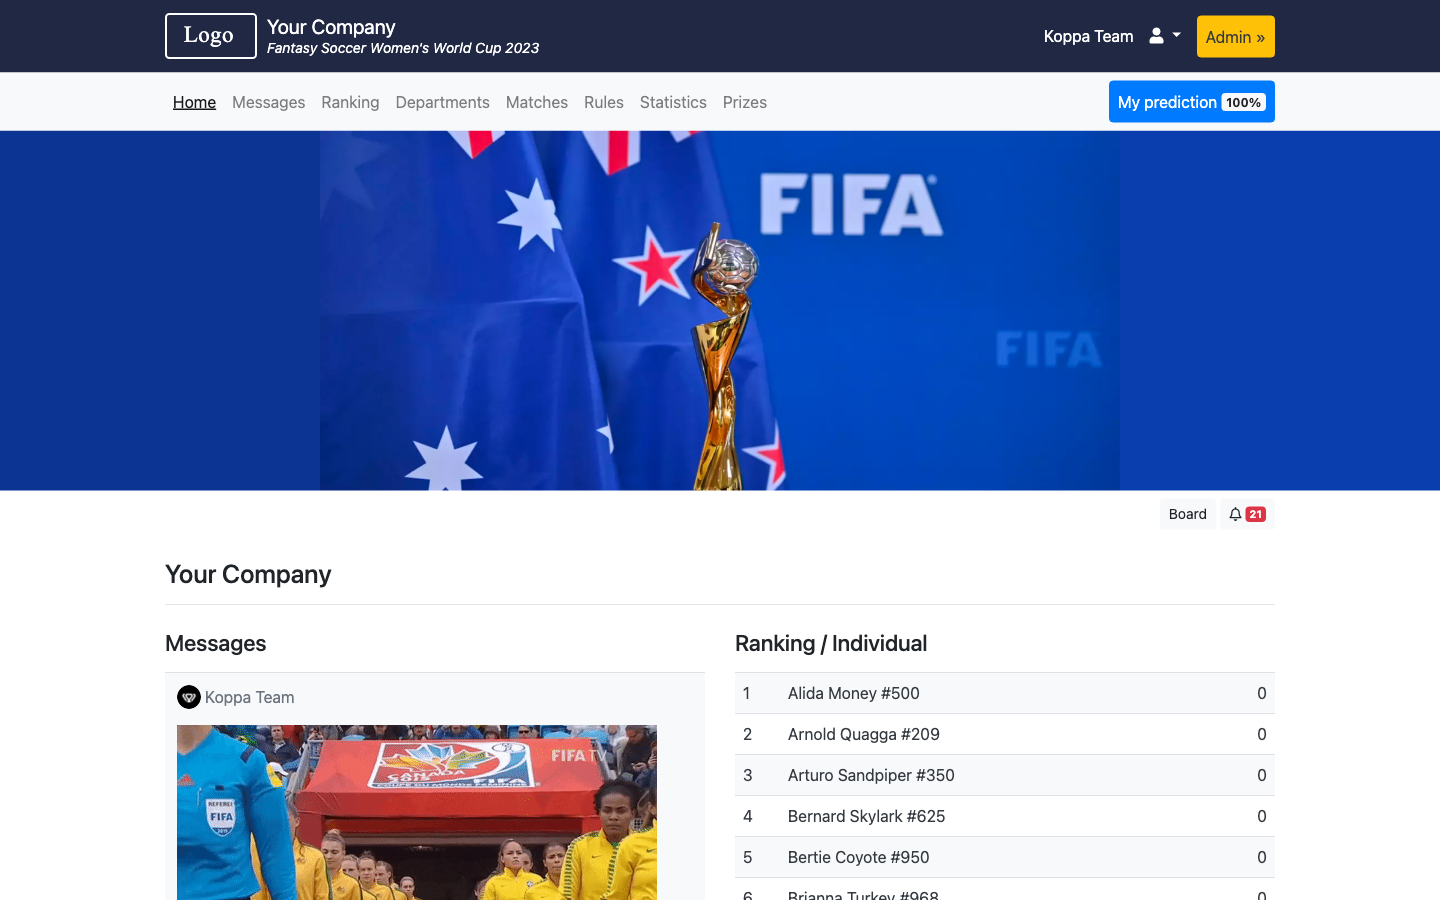 Fantasy Soccer Women's World Cup 2023 Home